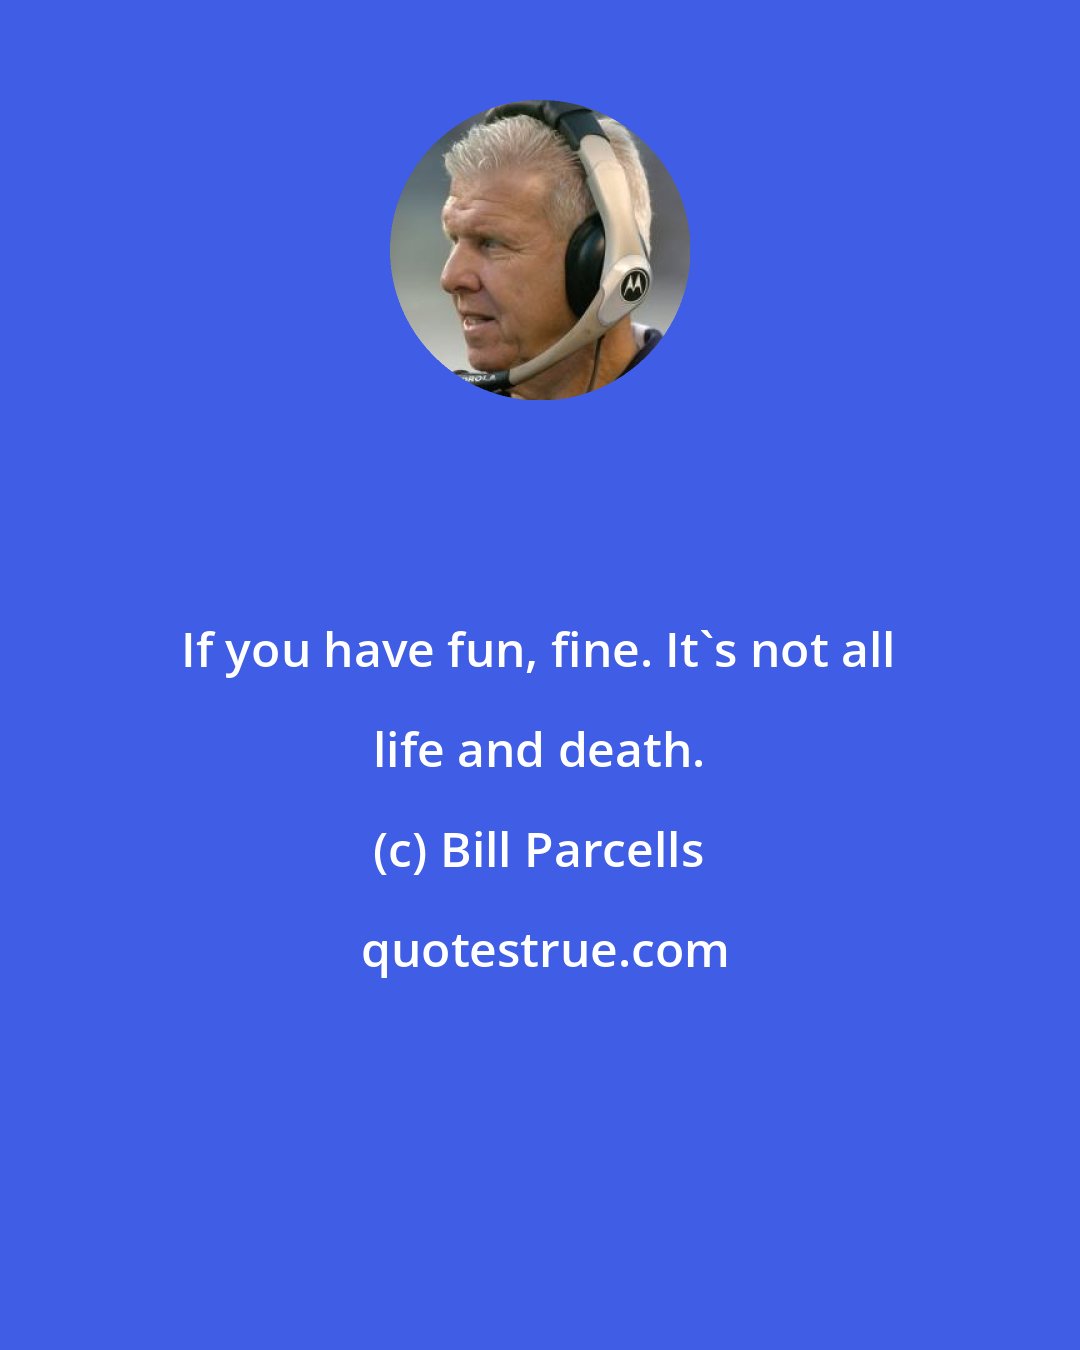 Bill Parcells: If you have fun, fine. It's not all life and death.